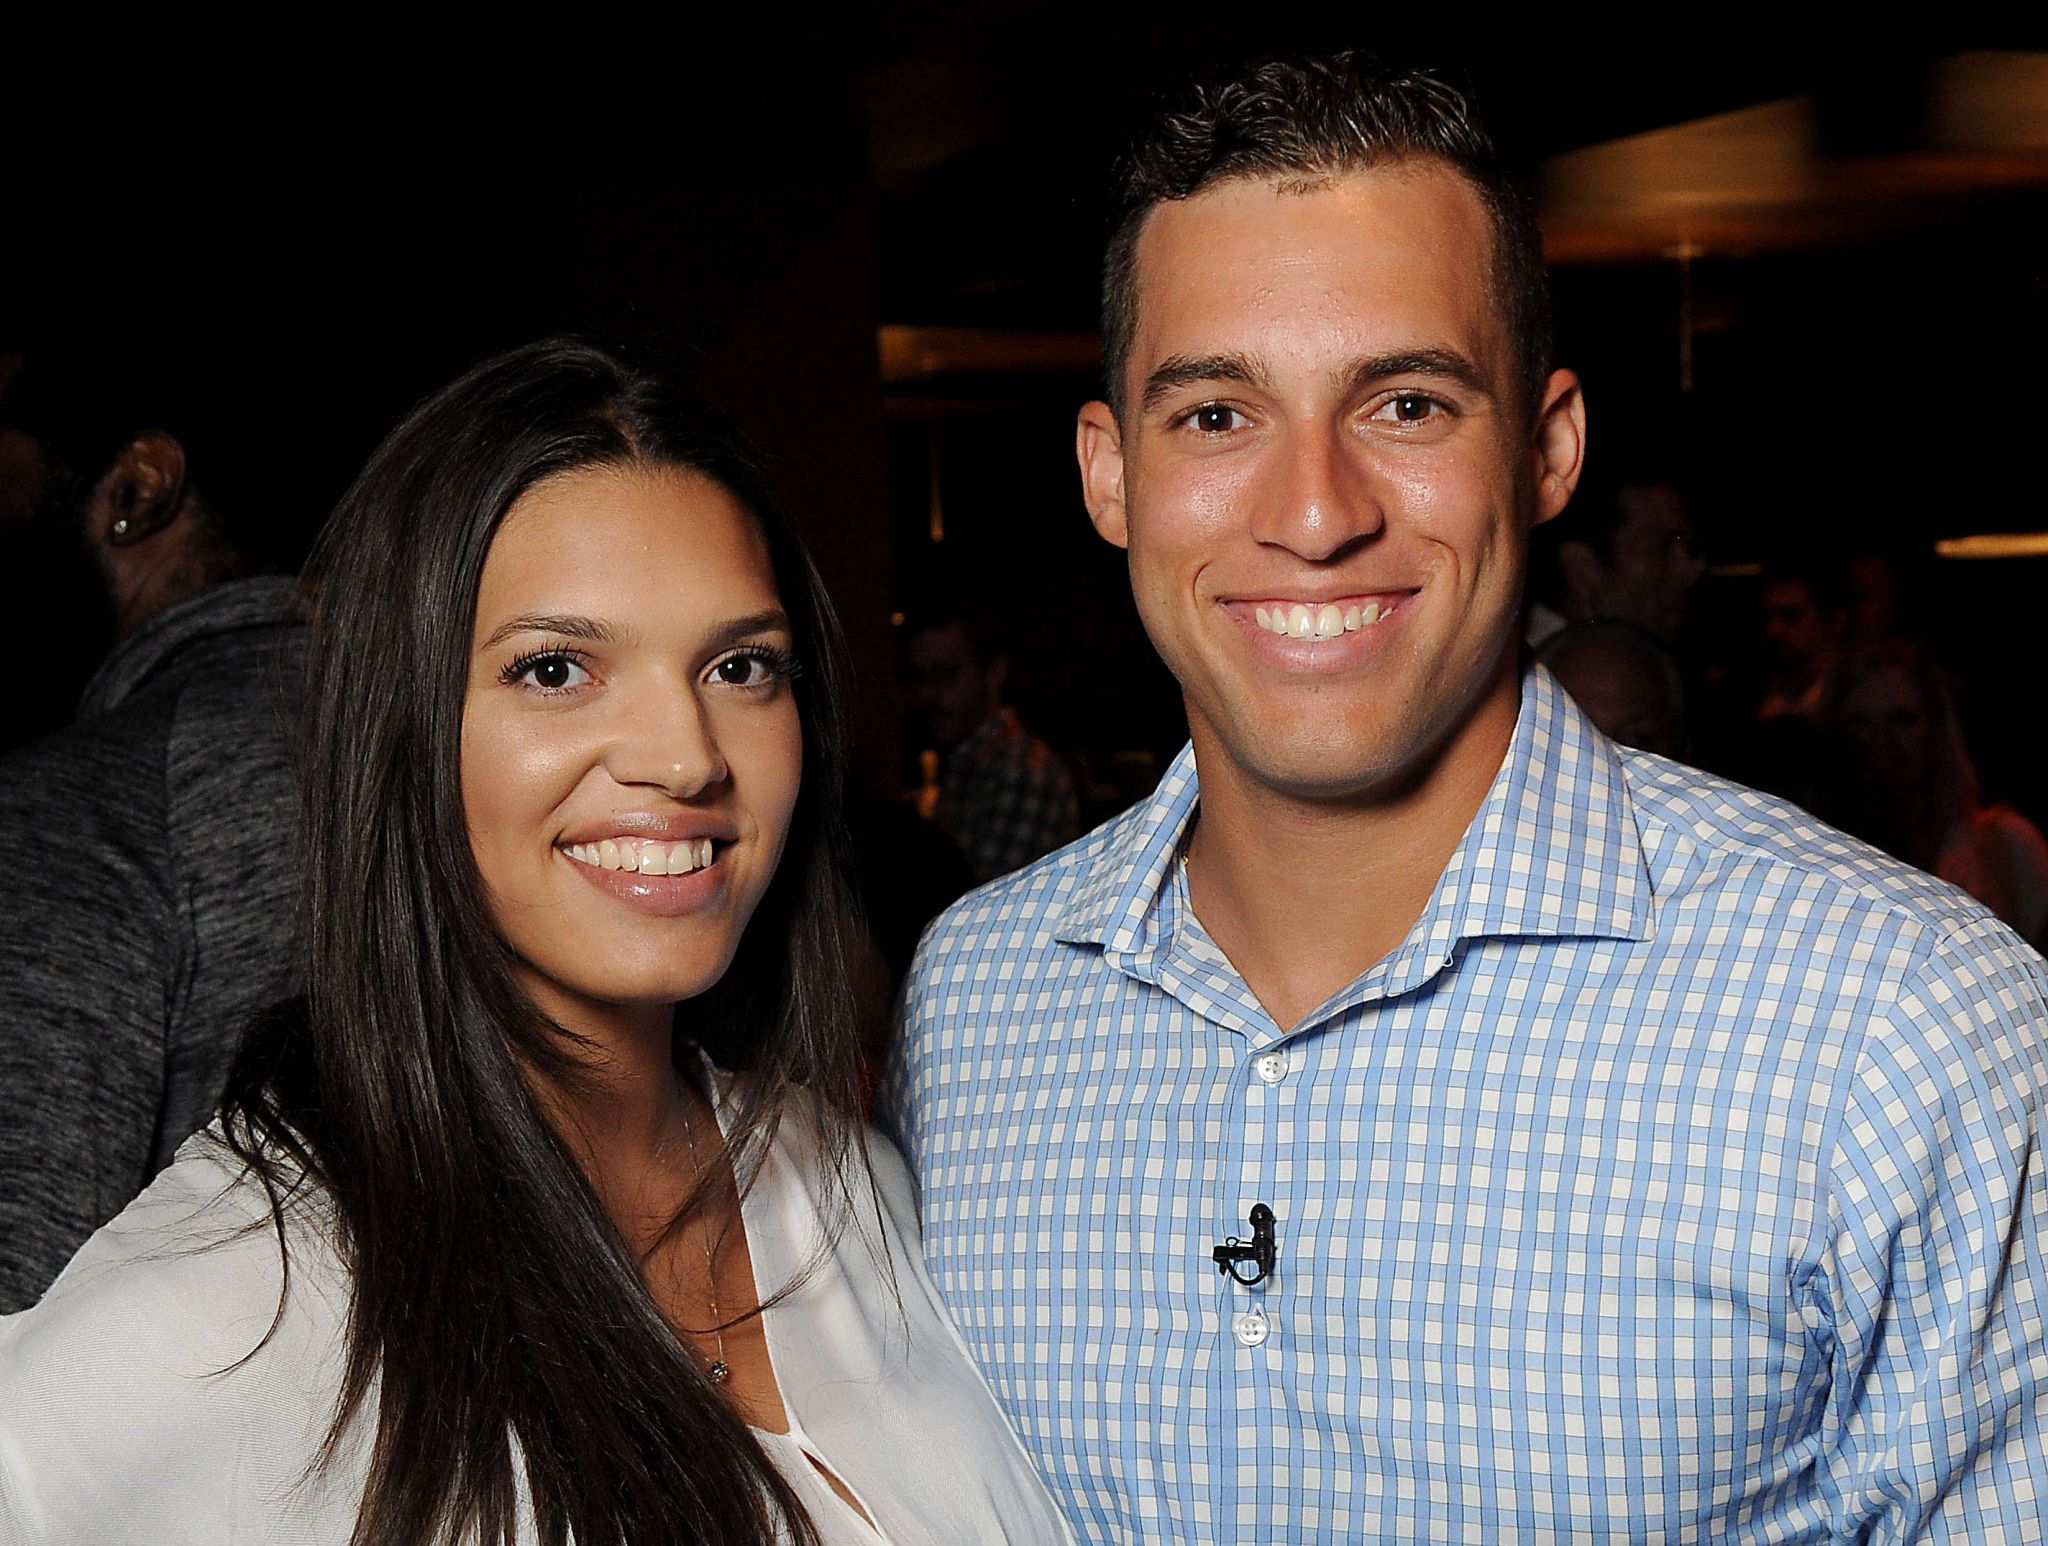 Meet Charlise Castro, George Springer's fiancée and former